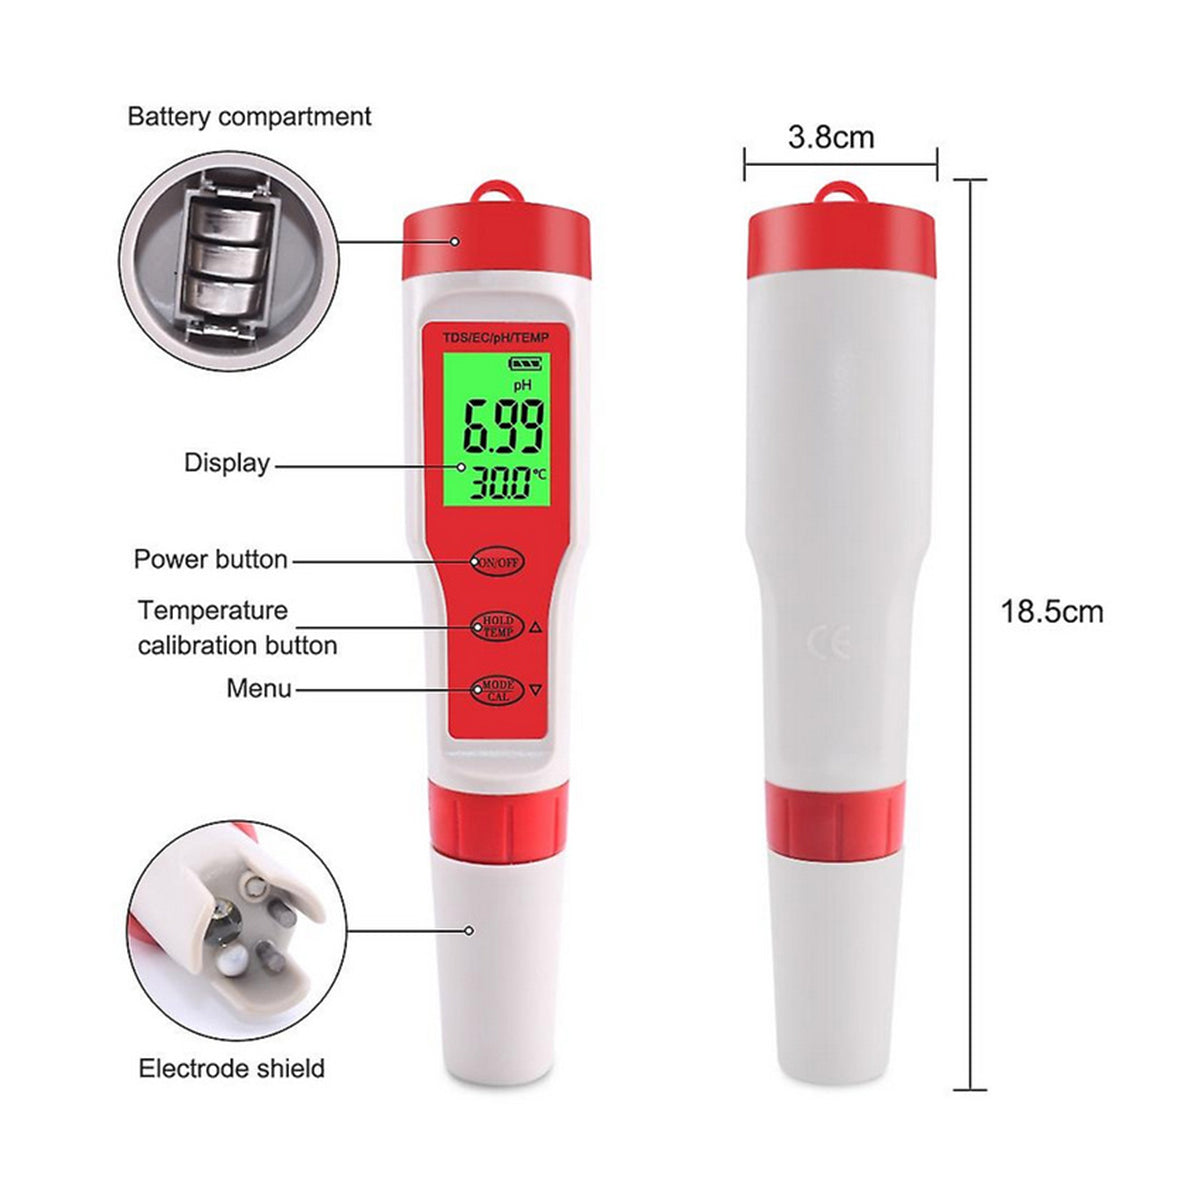 4-in-1 pH EC TDS Temperature Meter | Water Quality Tester for Home, Labs, and Beyond